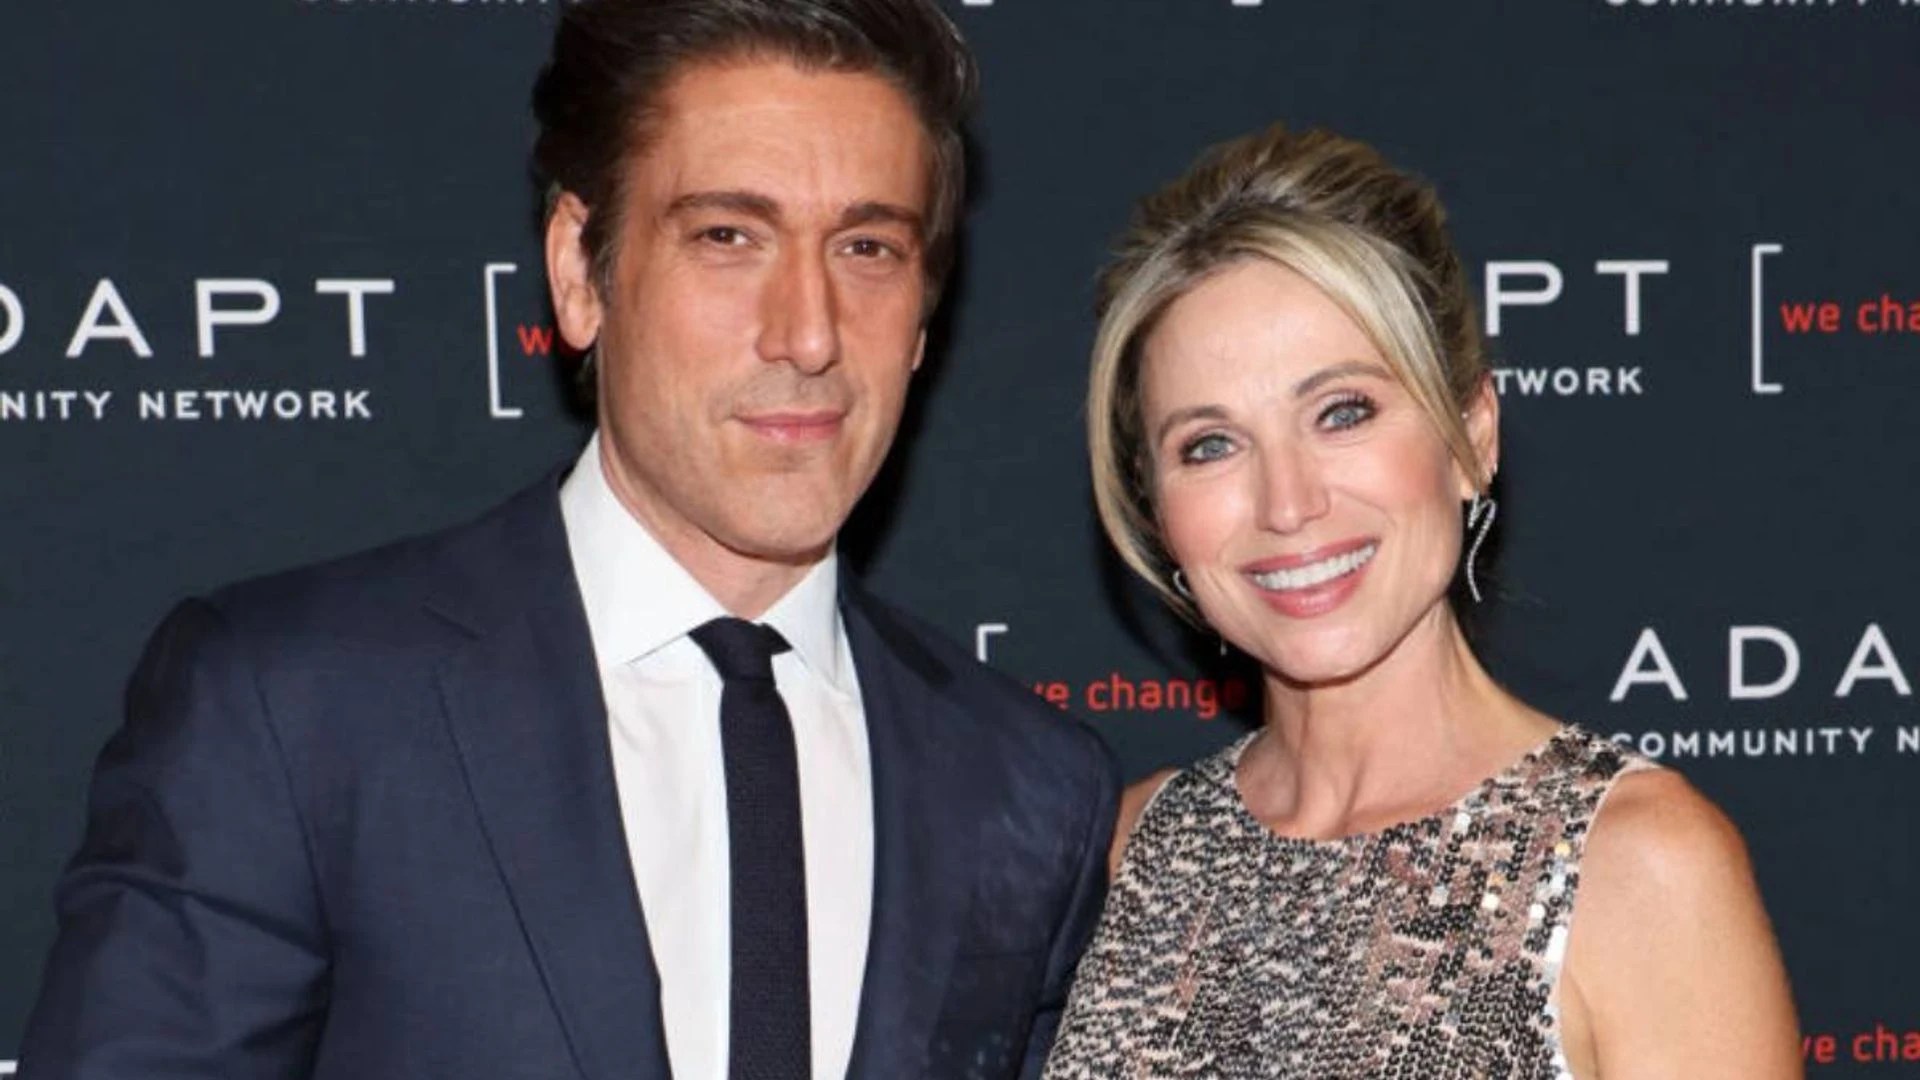 ABC's David Muir and Amy Robach make a stunning couple in new photo